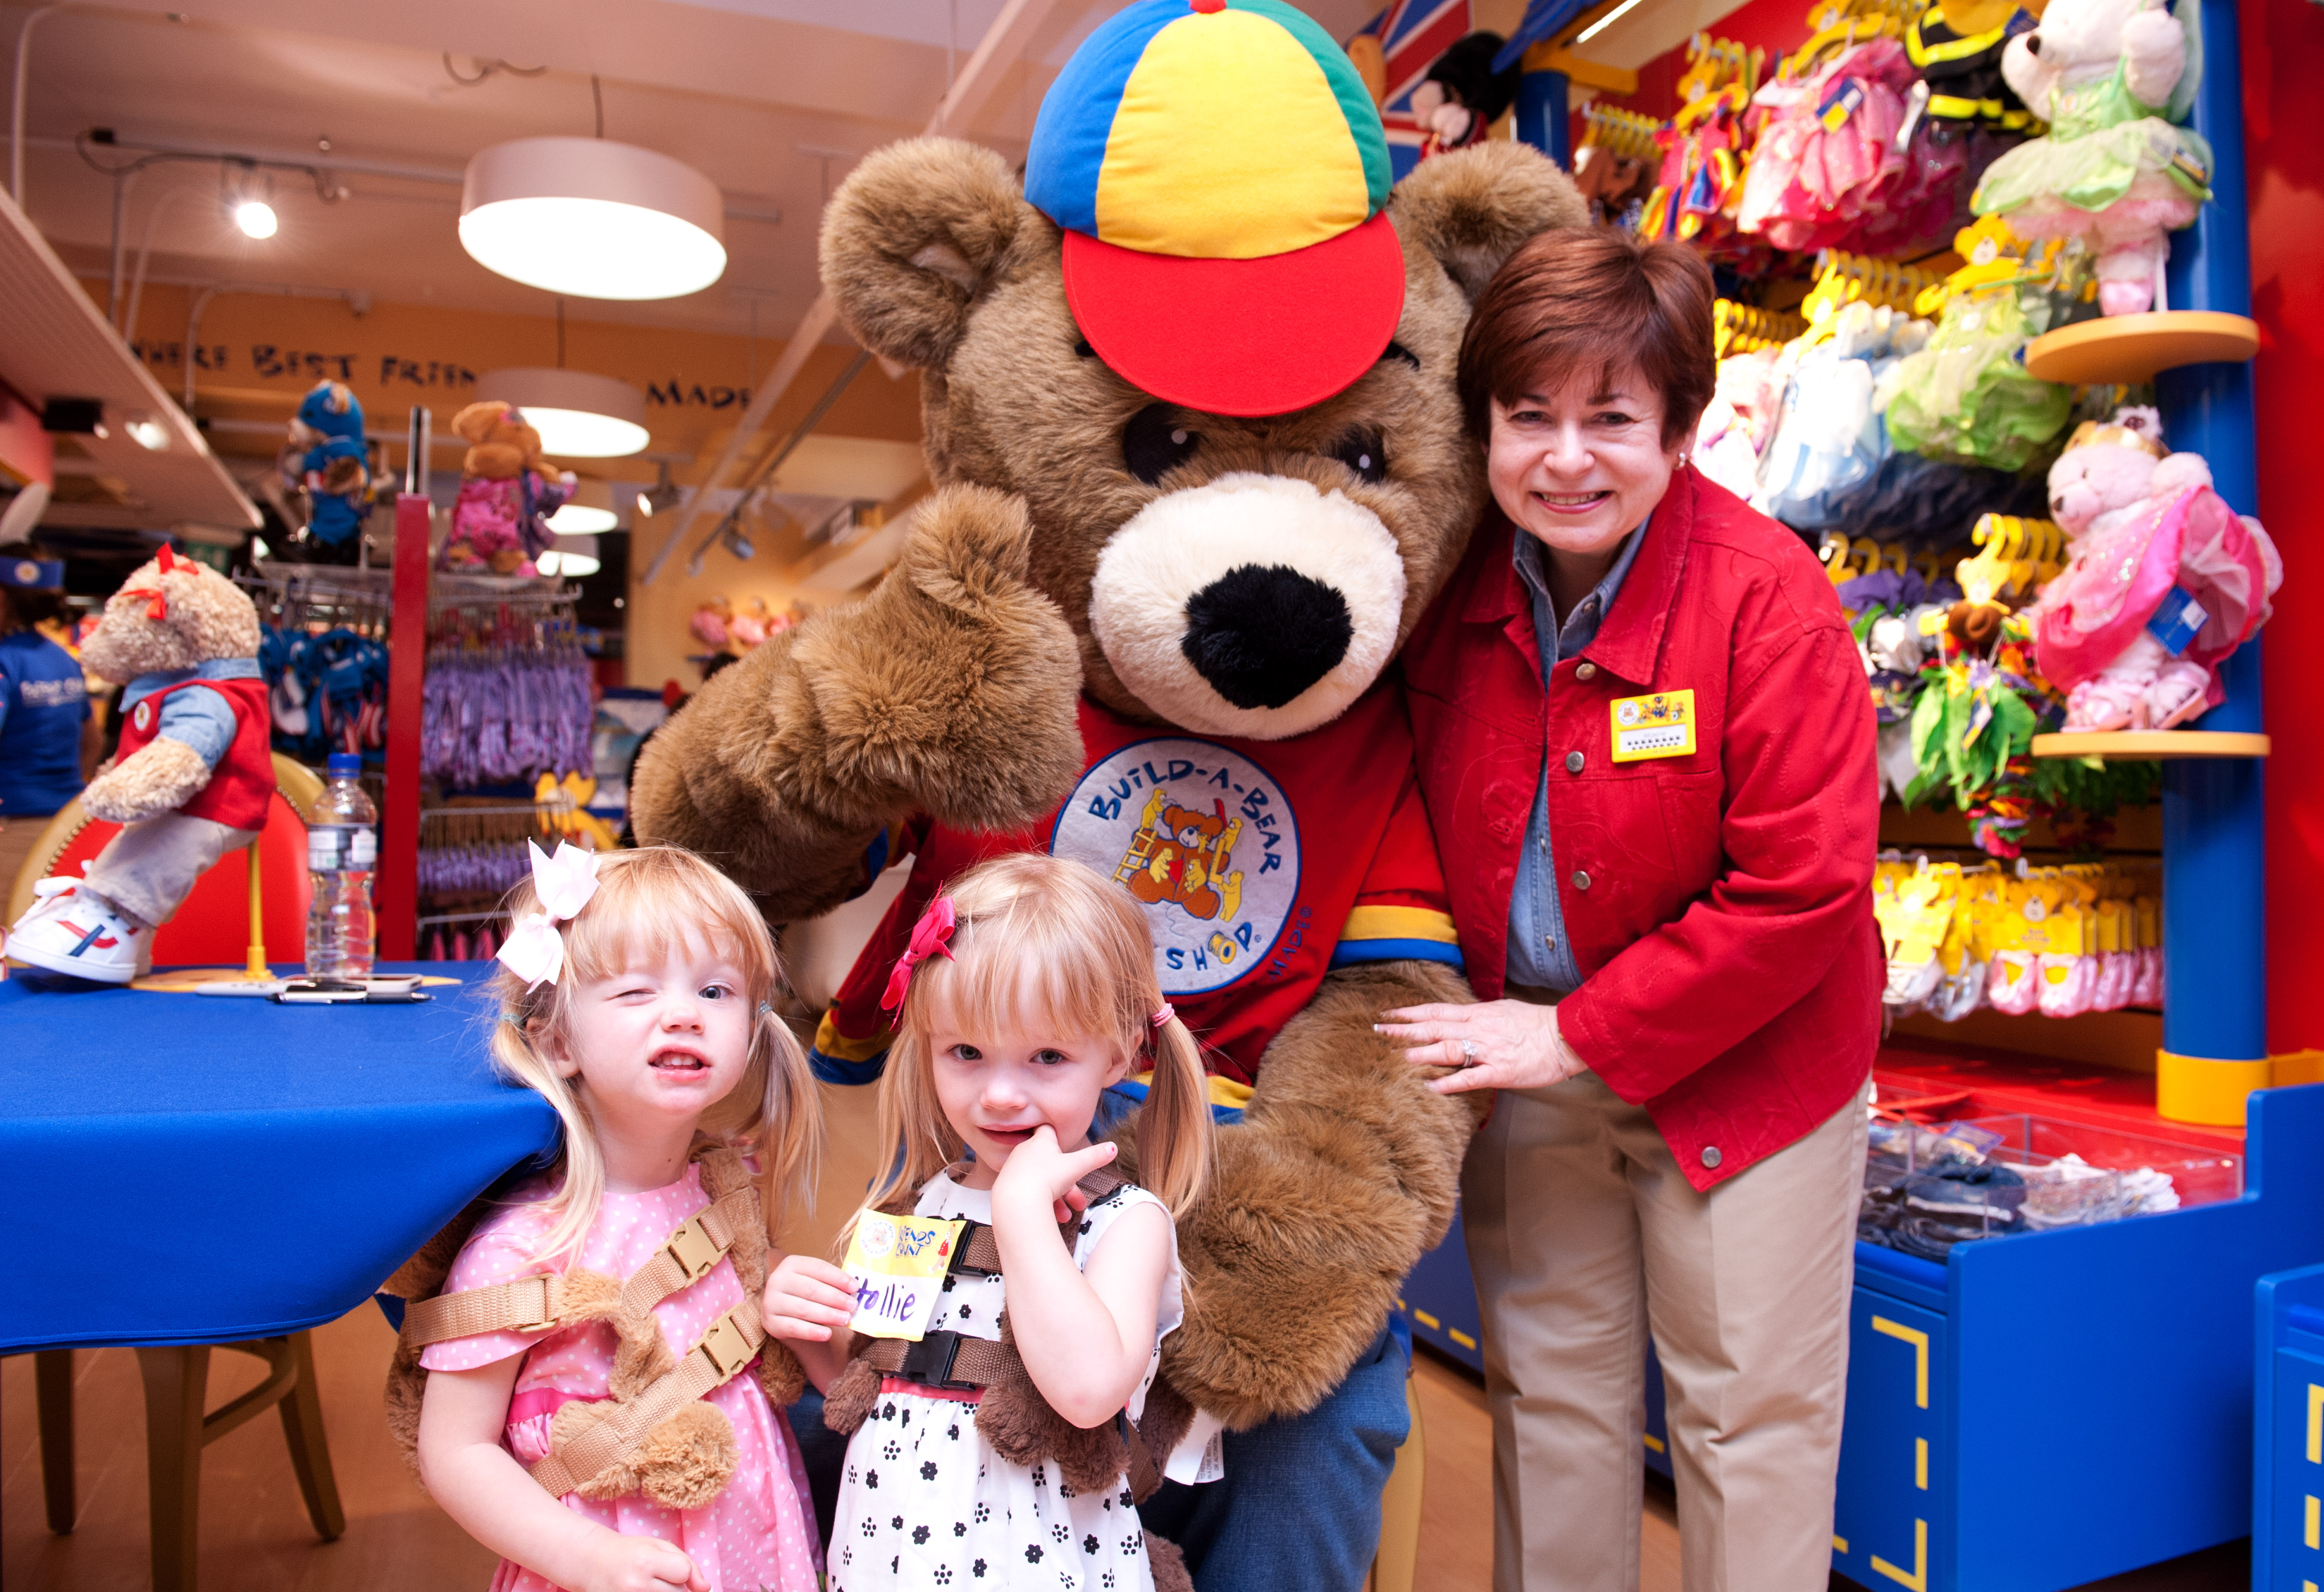 Build-A-Bear-Workshop-Grand-Re-Opening-Hamleys-Twins-Hollie-and-Ella-Hooper-2-years-6-months-meet-BABW-mascot-Bearemy-and-Founder-Maxine-Clark